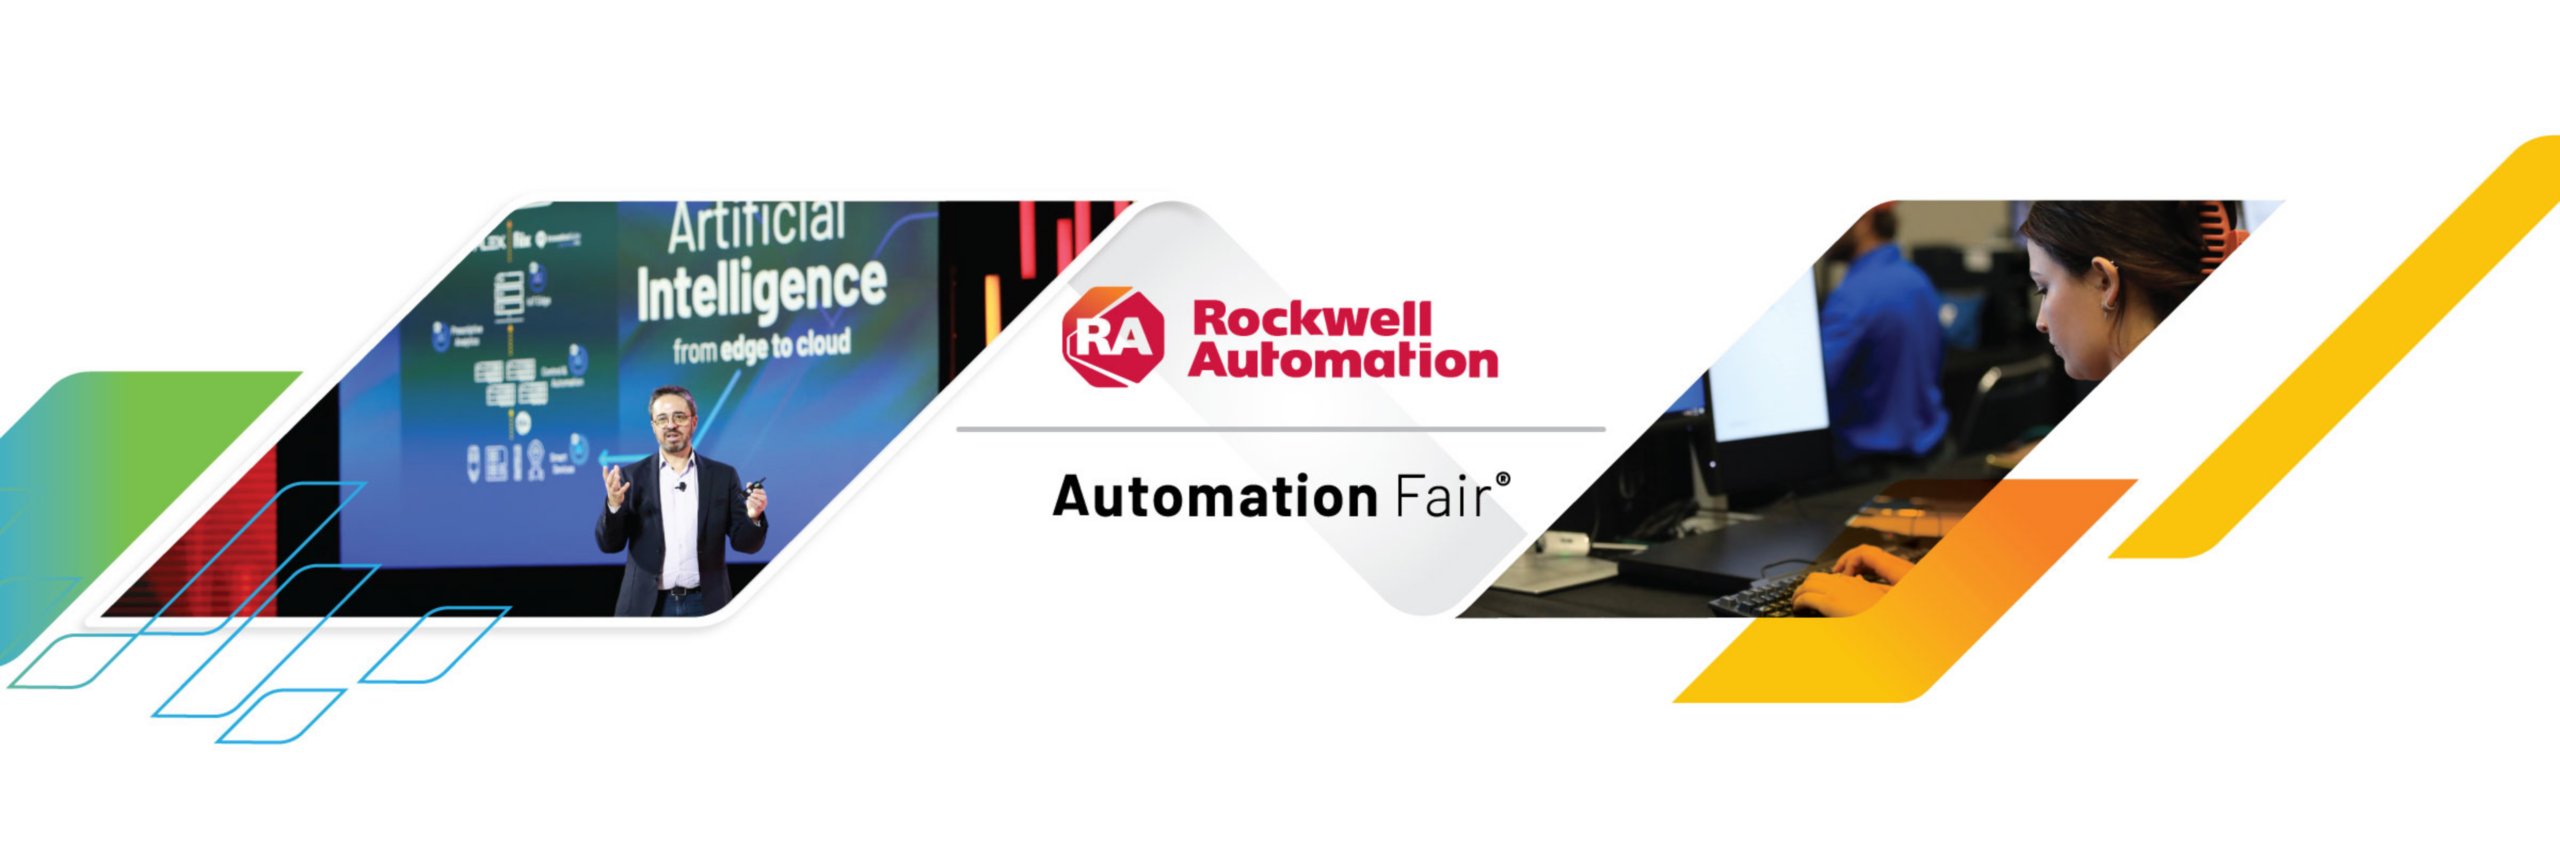 Rockwell Automation – Automation Fair logo with an image of a male giving a presentation with the words Artificial Intelligence on the screen and another image to the right of a female at a computer station in a hands-on lab session. 